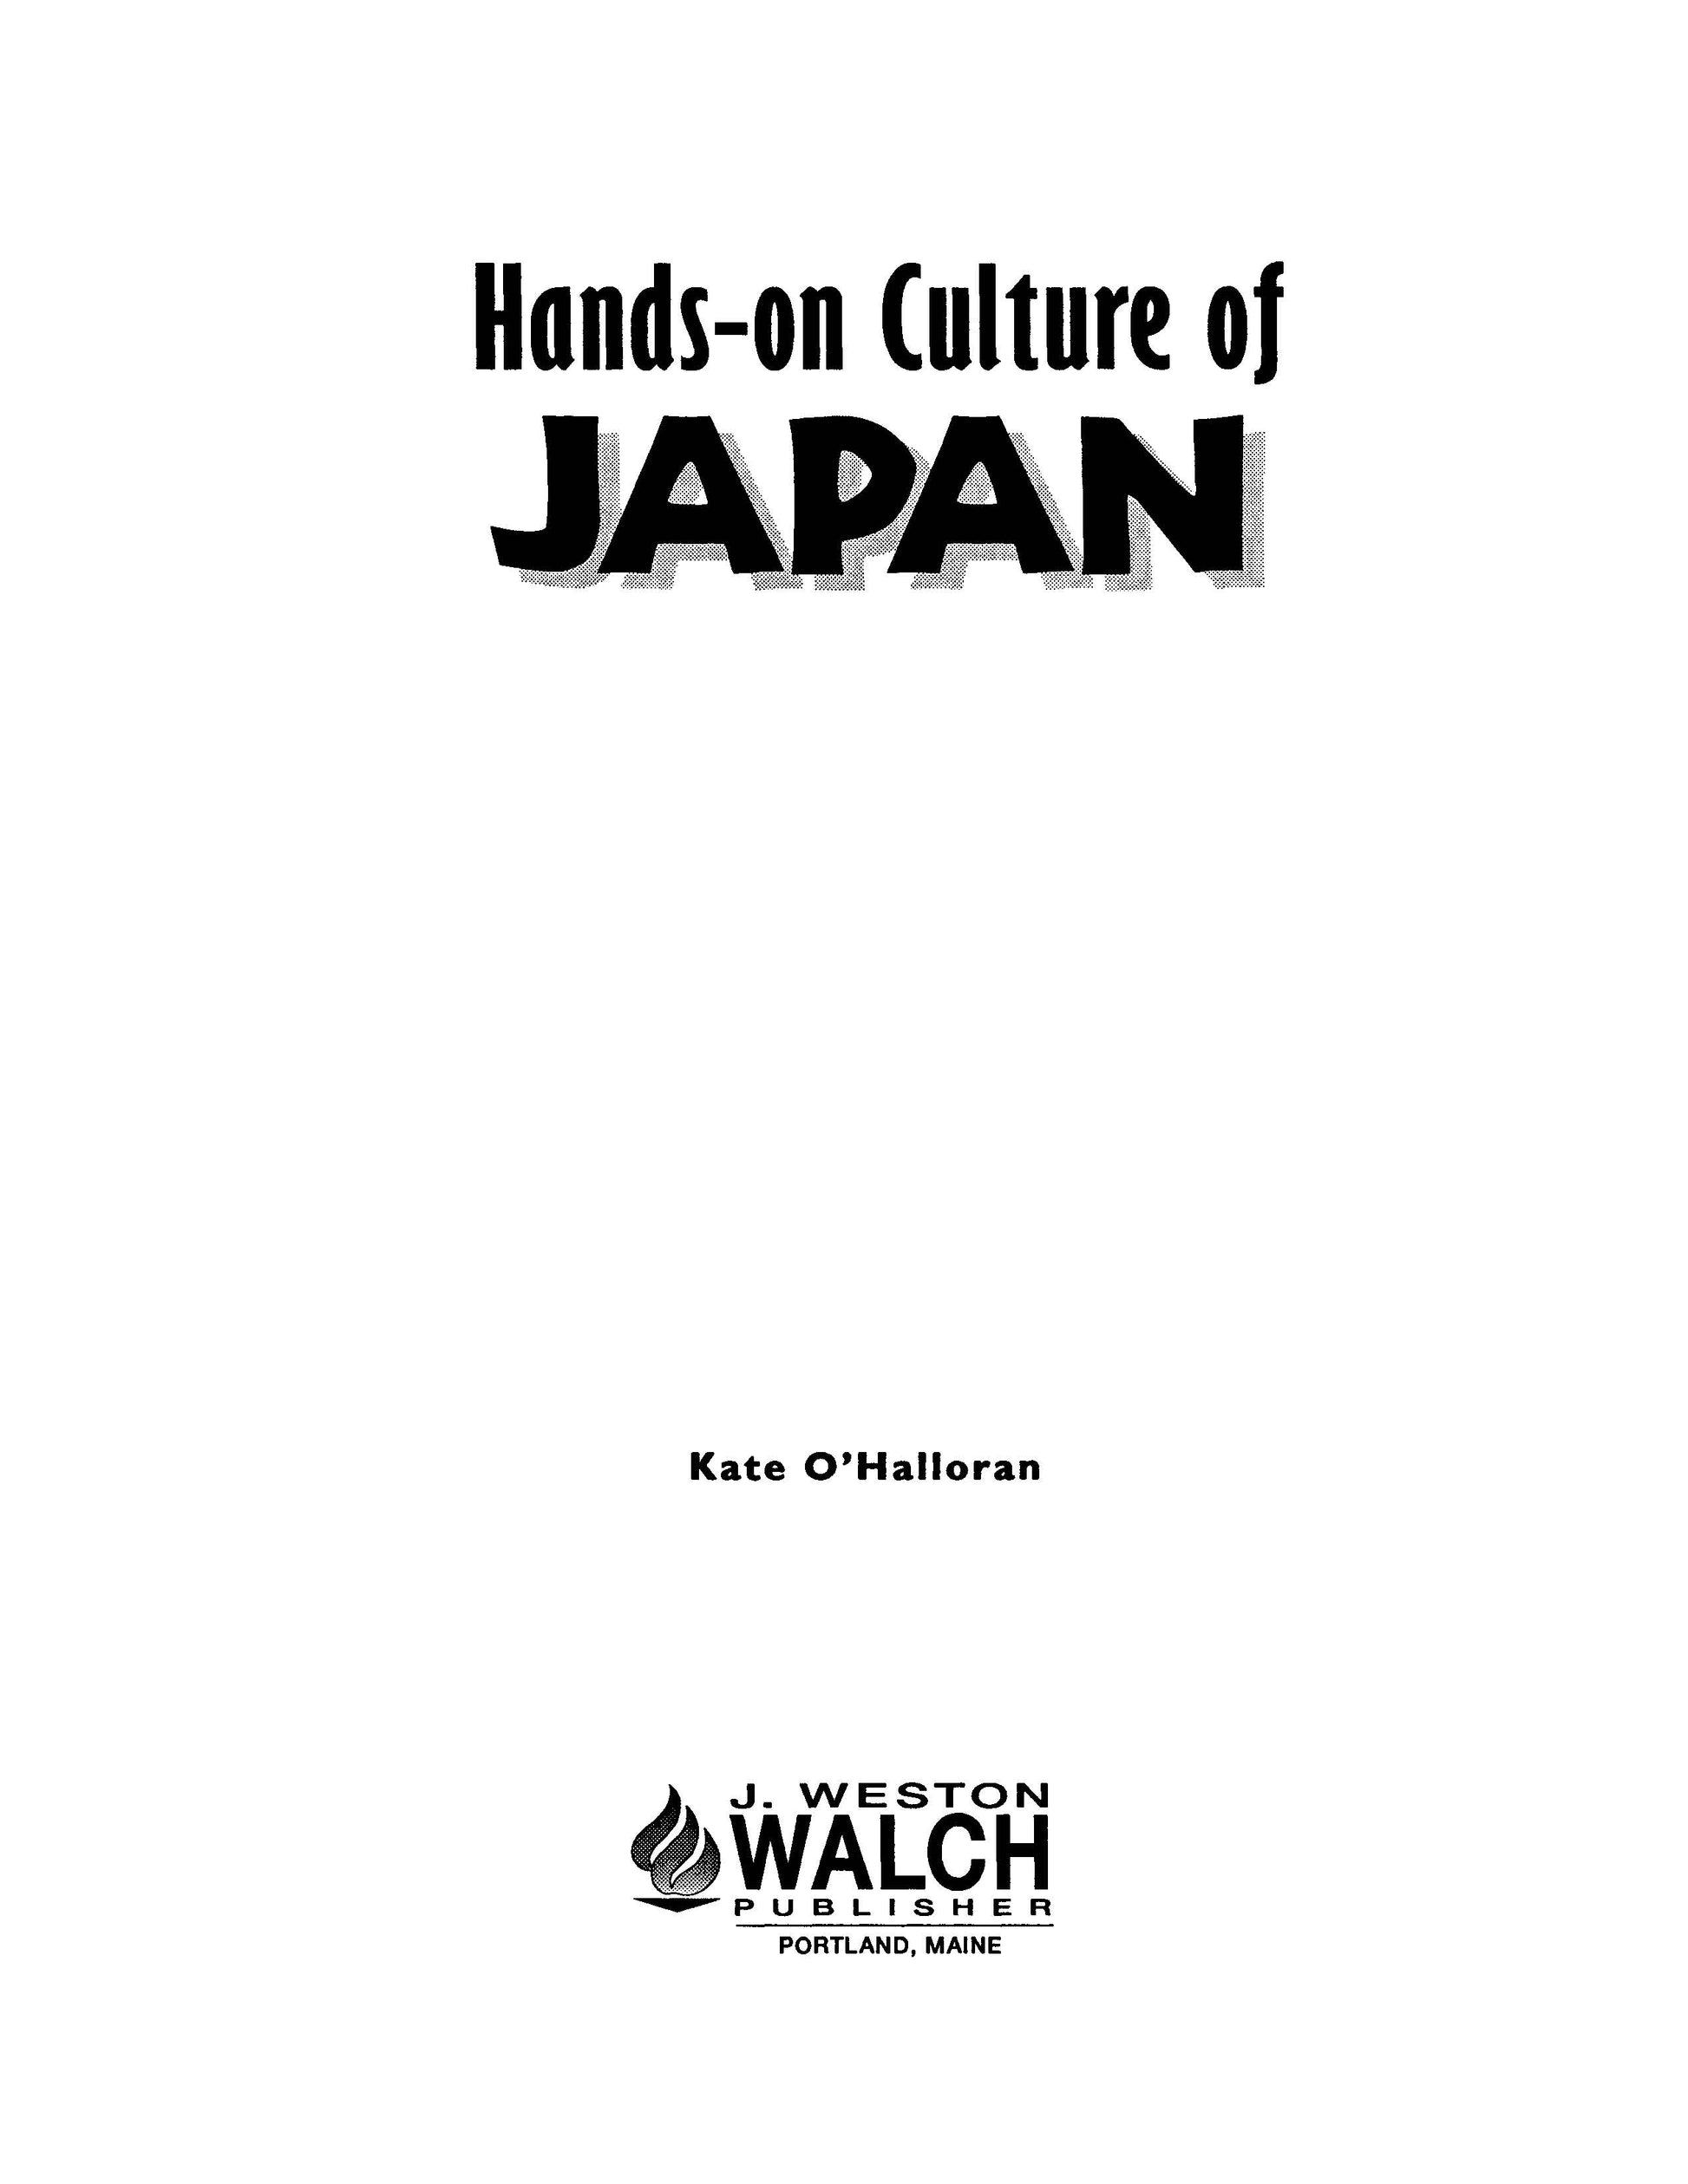 Japan culture, hands-on activities, geography curriculum, humanities education, cultural appreciation, experiential learning, Japanese traditions, global awareness, interactive learning, student engagement, diversity education, world cultures, cultural exploration, cultural understanding, geography resources, hands-on geography, educational materials, Japan history, Japan geography, Japanese language, cross-cultural education.